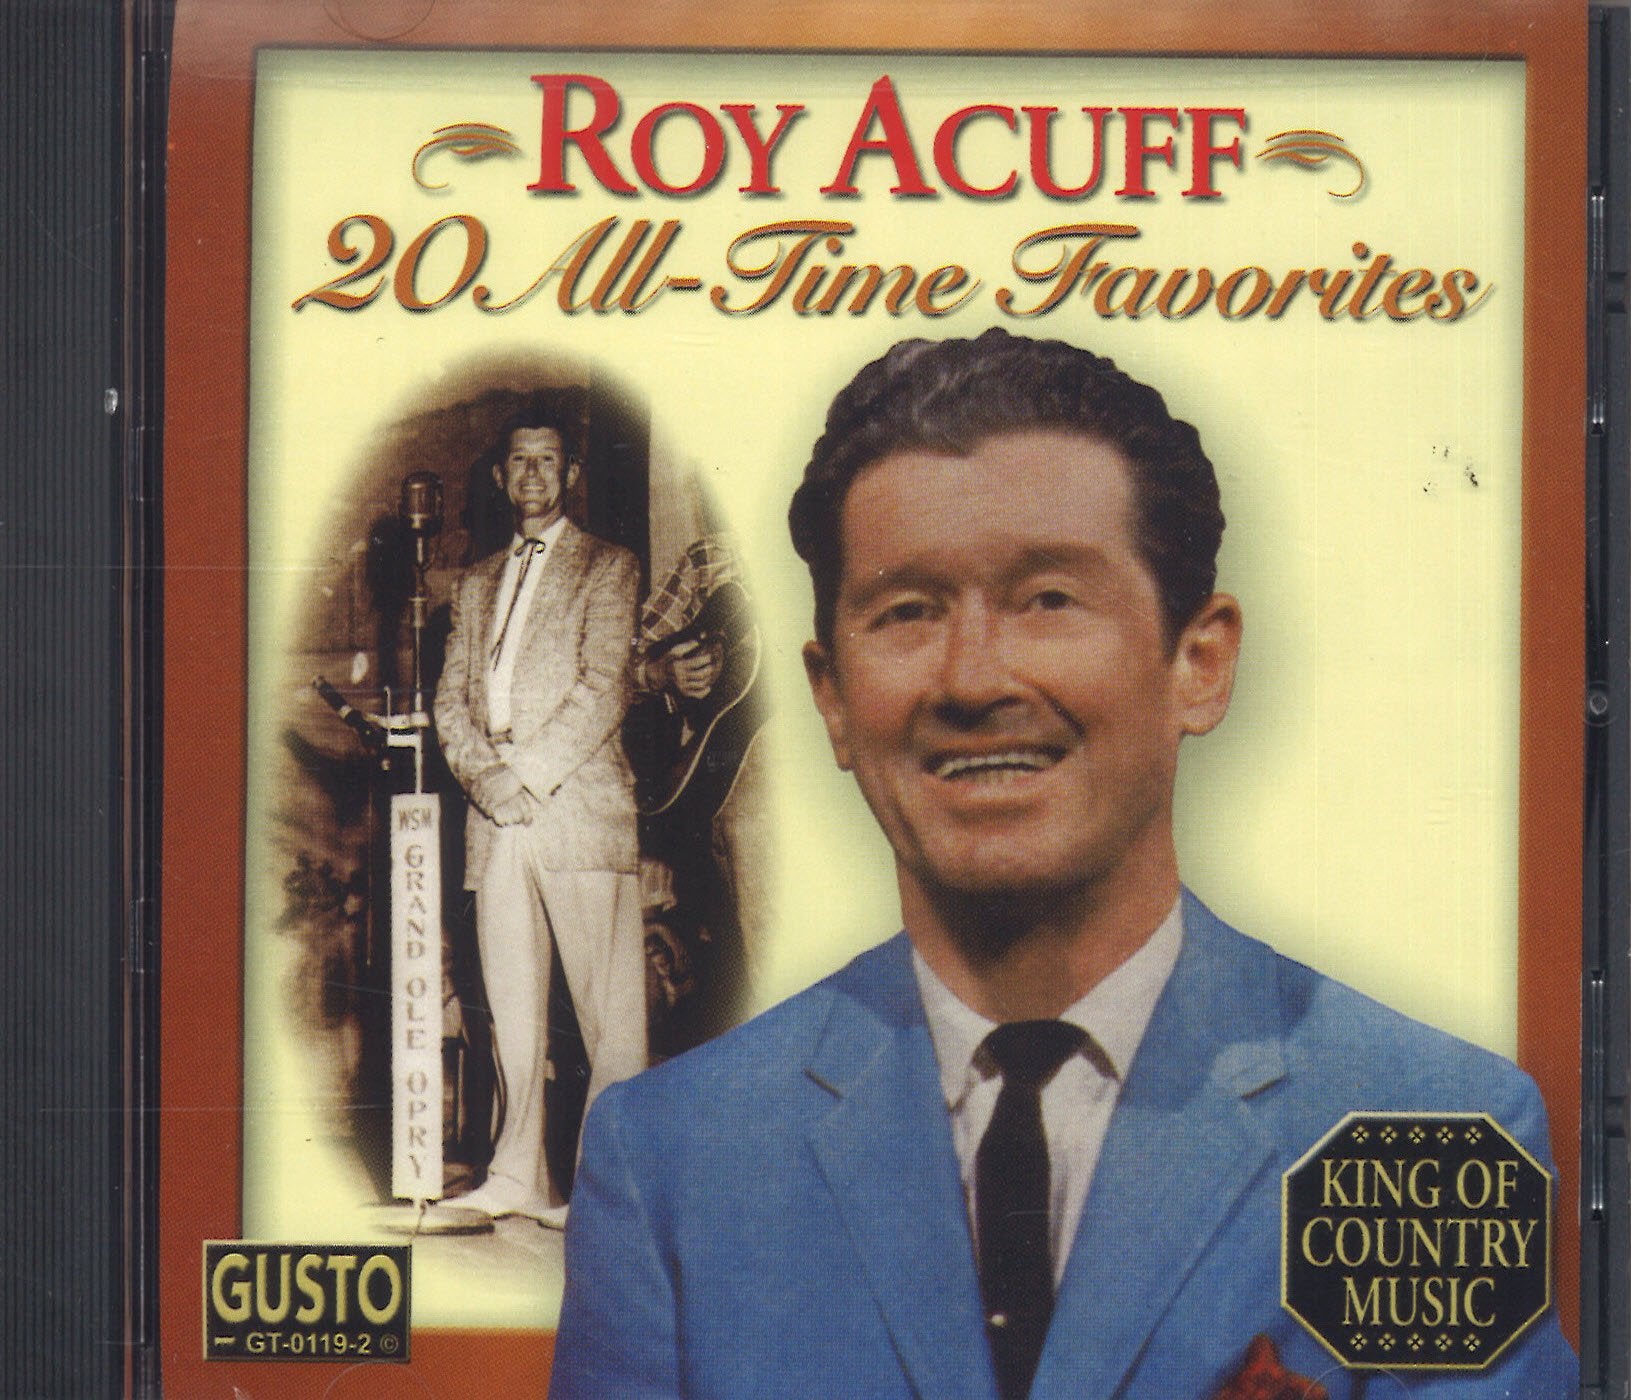 Roy Acuff 20 All-Time Favorites